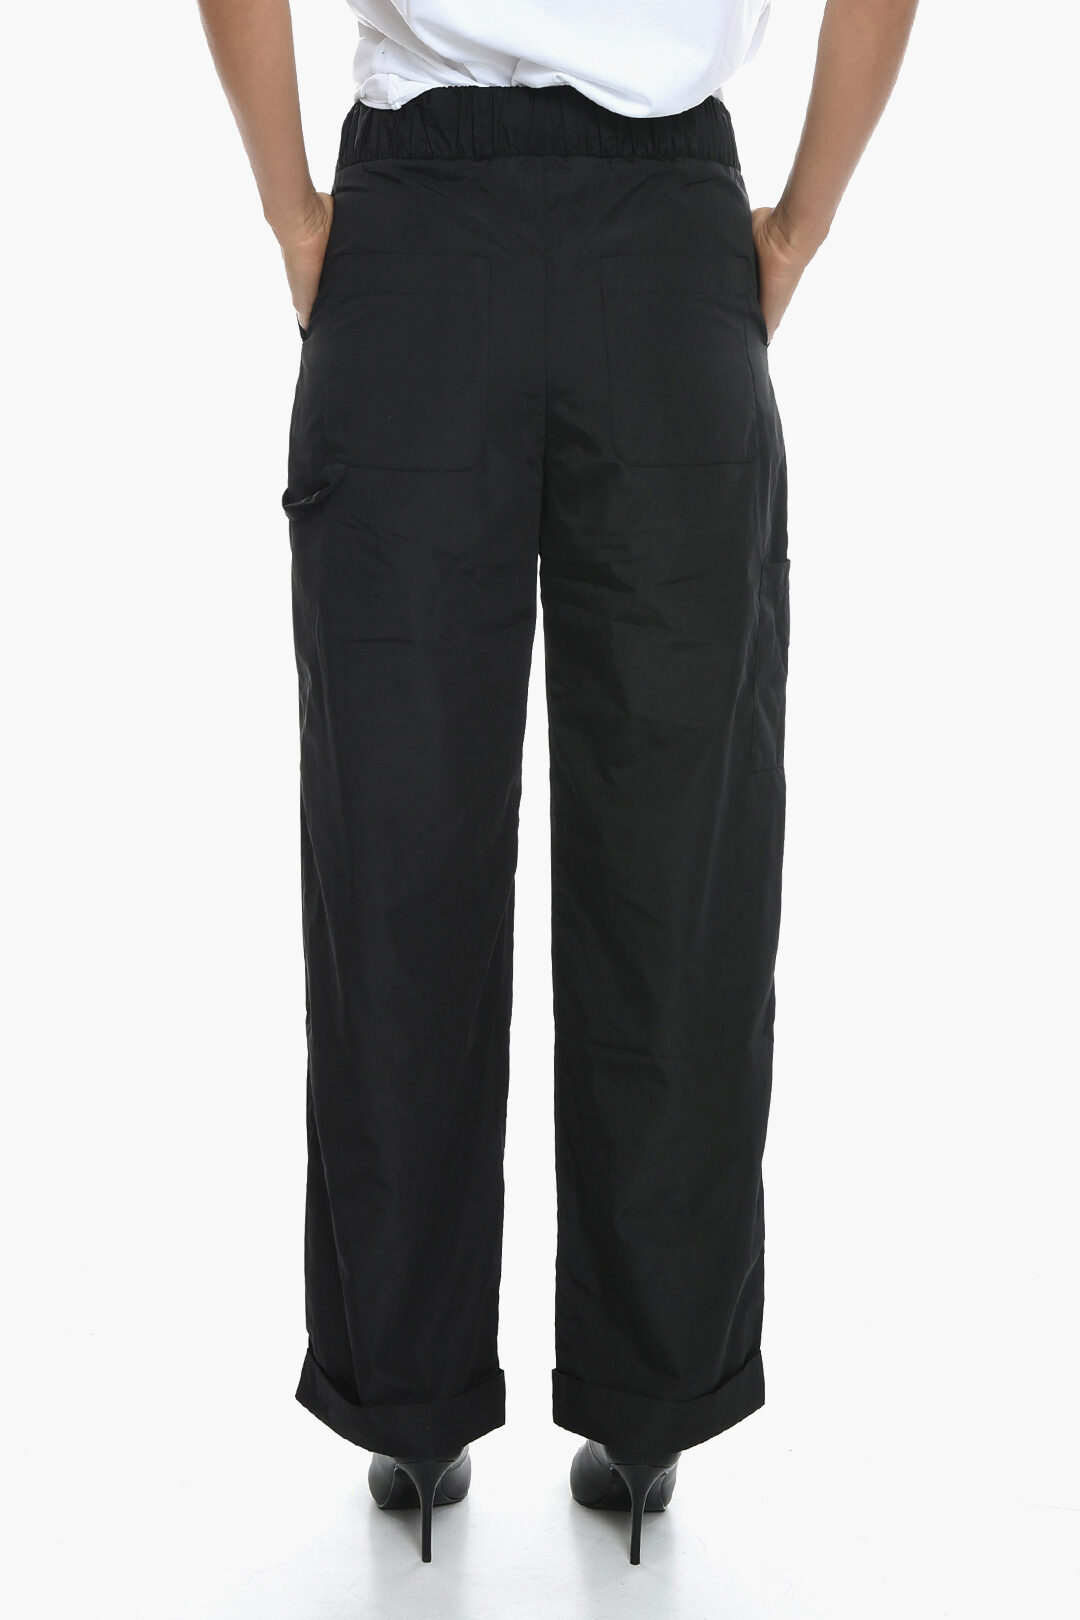 Cato Fashions  Cato Belted Trouser Pants